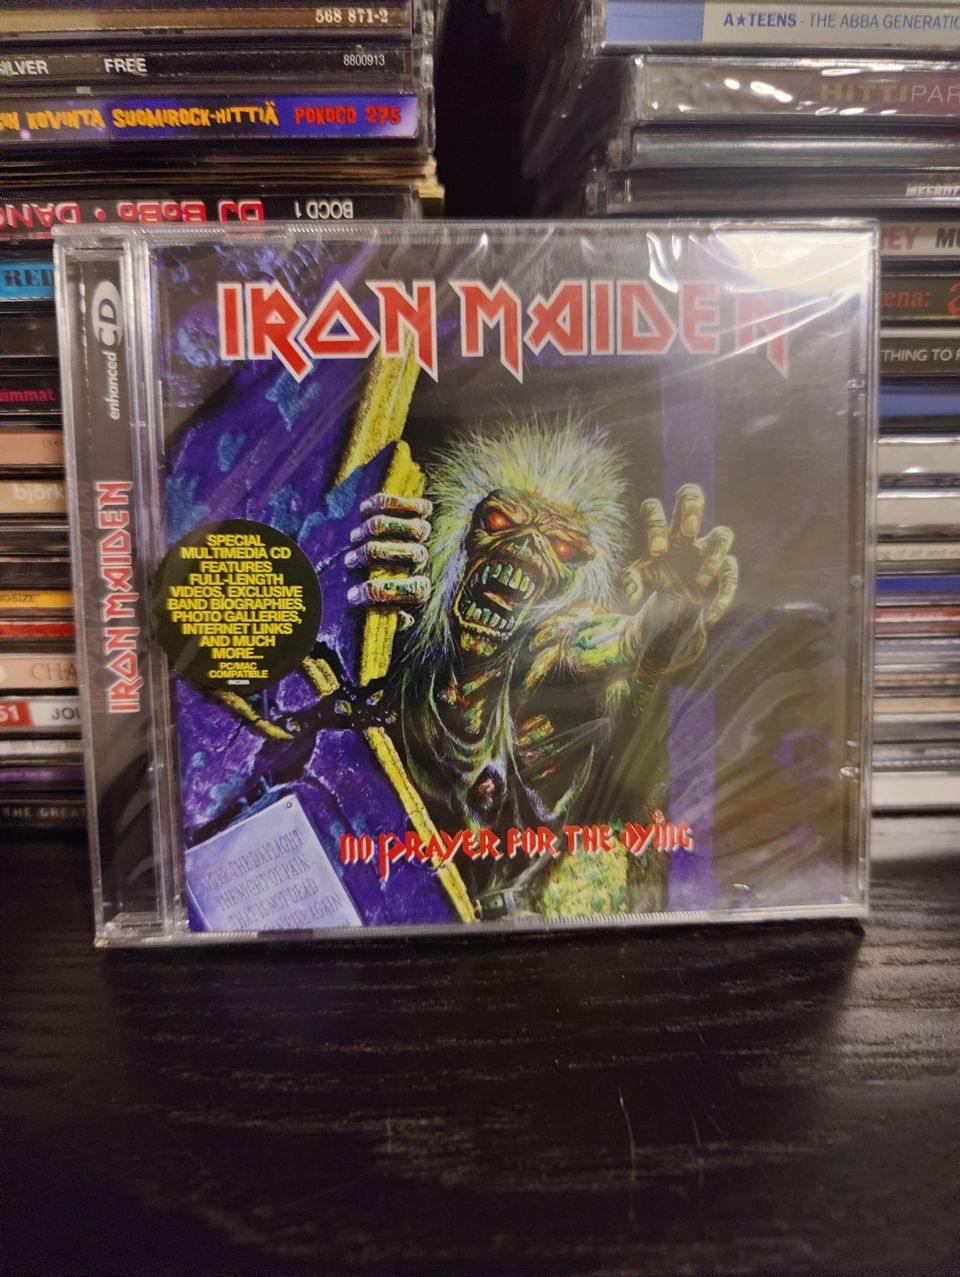 Iron maiden no prayer for the dyinq sealed, mint!